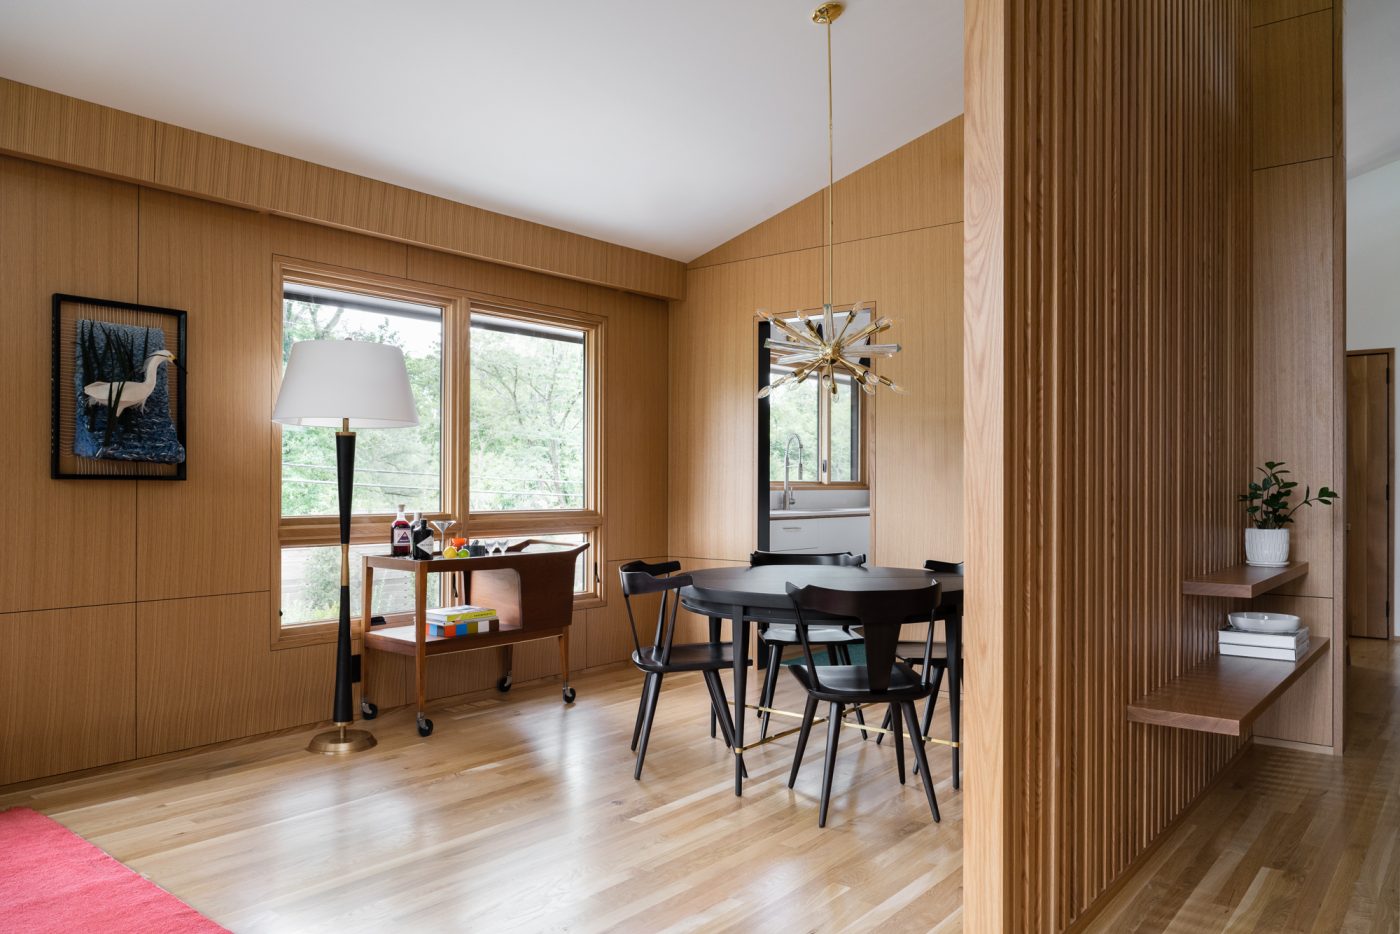 The dining room of a mid-century-modern home designed by Susan Yeley